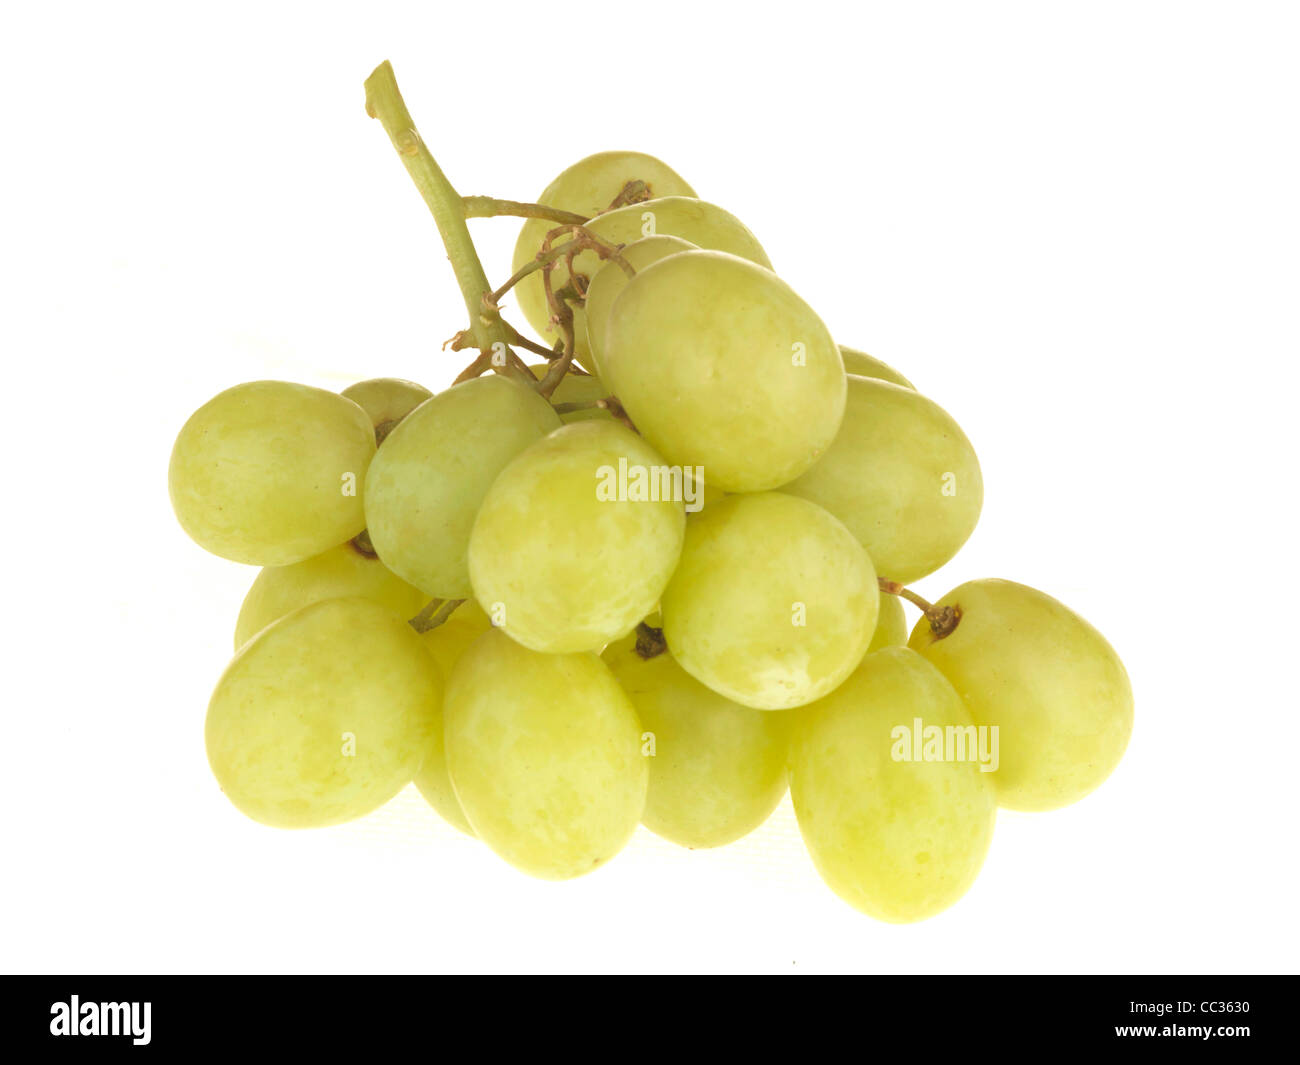 https://c8.alamy.com/comp/CC3630/bunch-of-fresh-ripe-juicy-green-grapes-isolated-against-a-white-background-CC3630.jpg